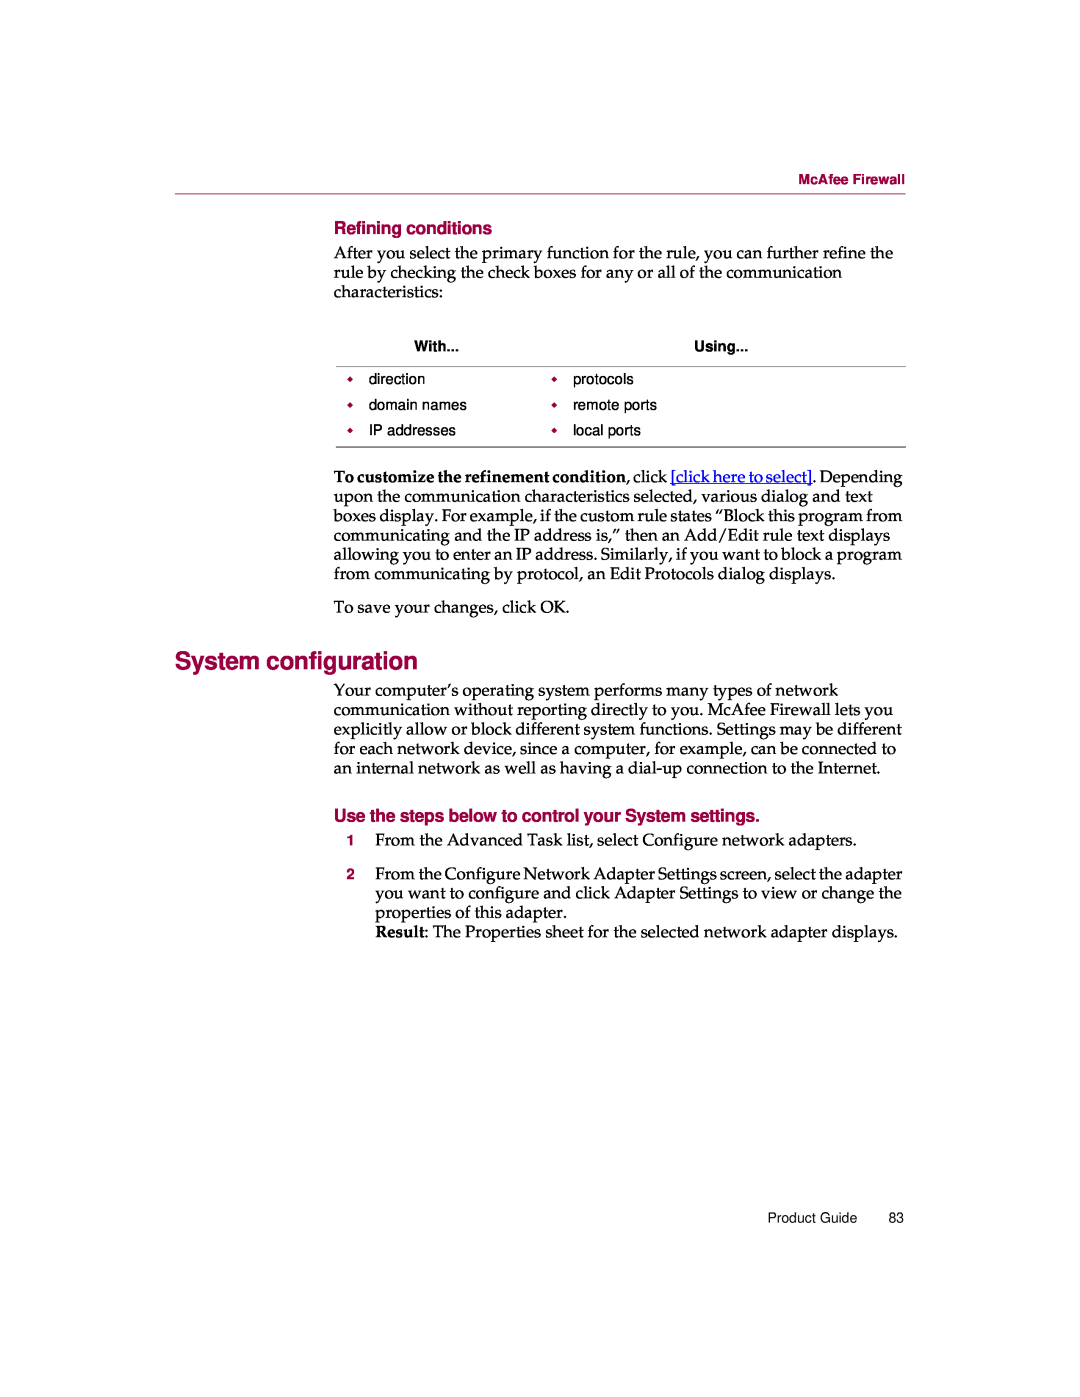 McAfee 5 manual System configuration, Refining conditions 